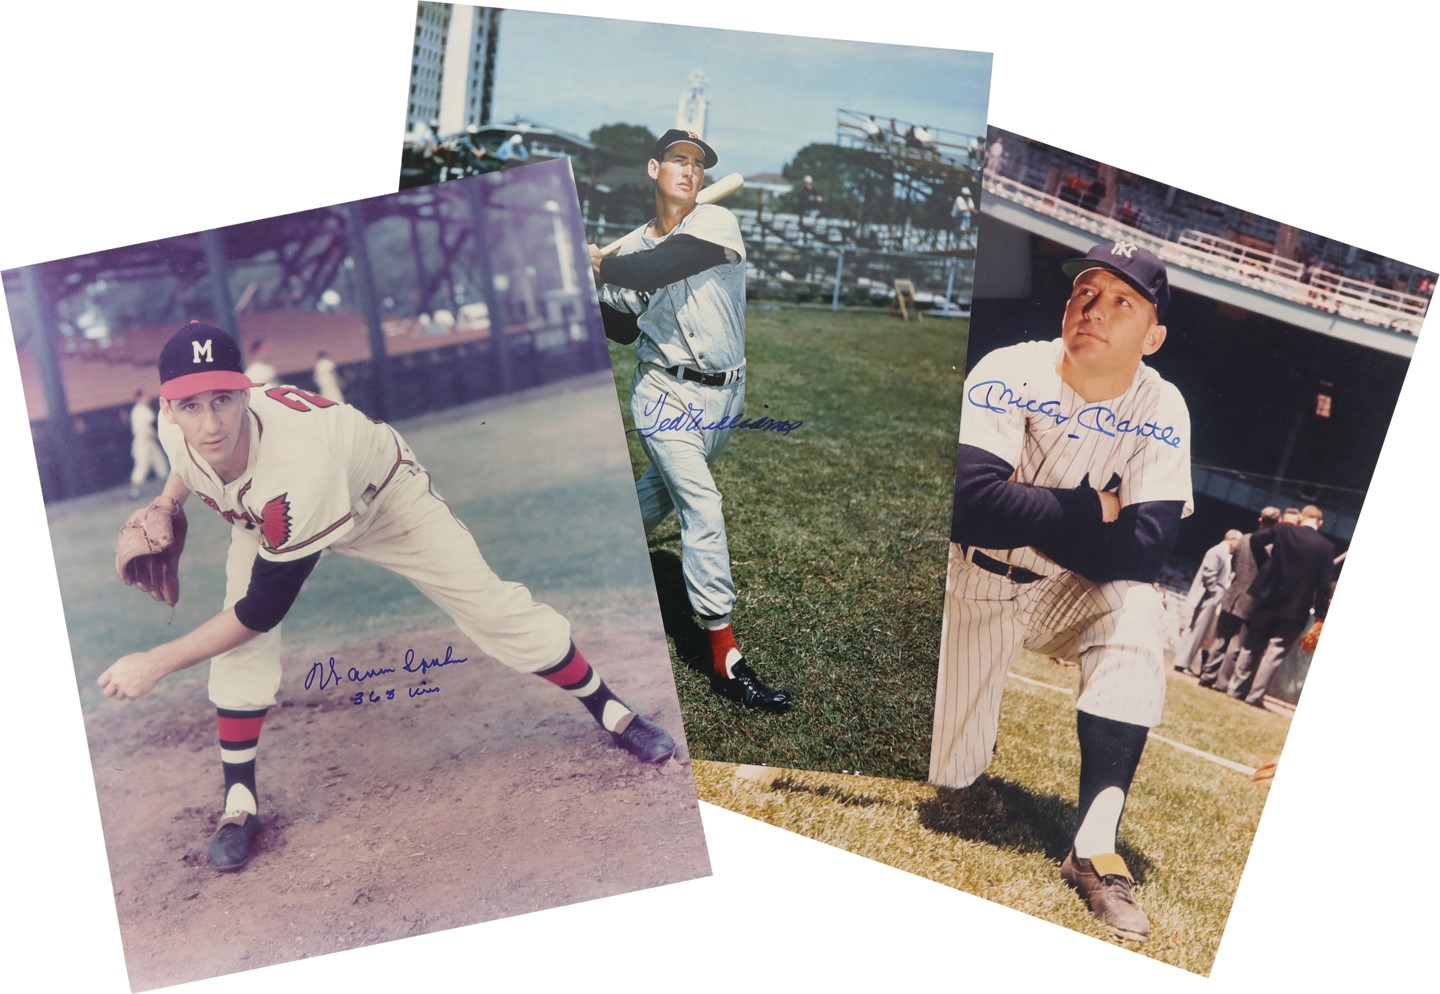 Hall of Fame 16x20" Signed Photograph Collection - Mantle, T. Williams, and Spahn (PSA)